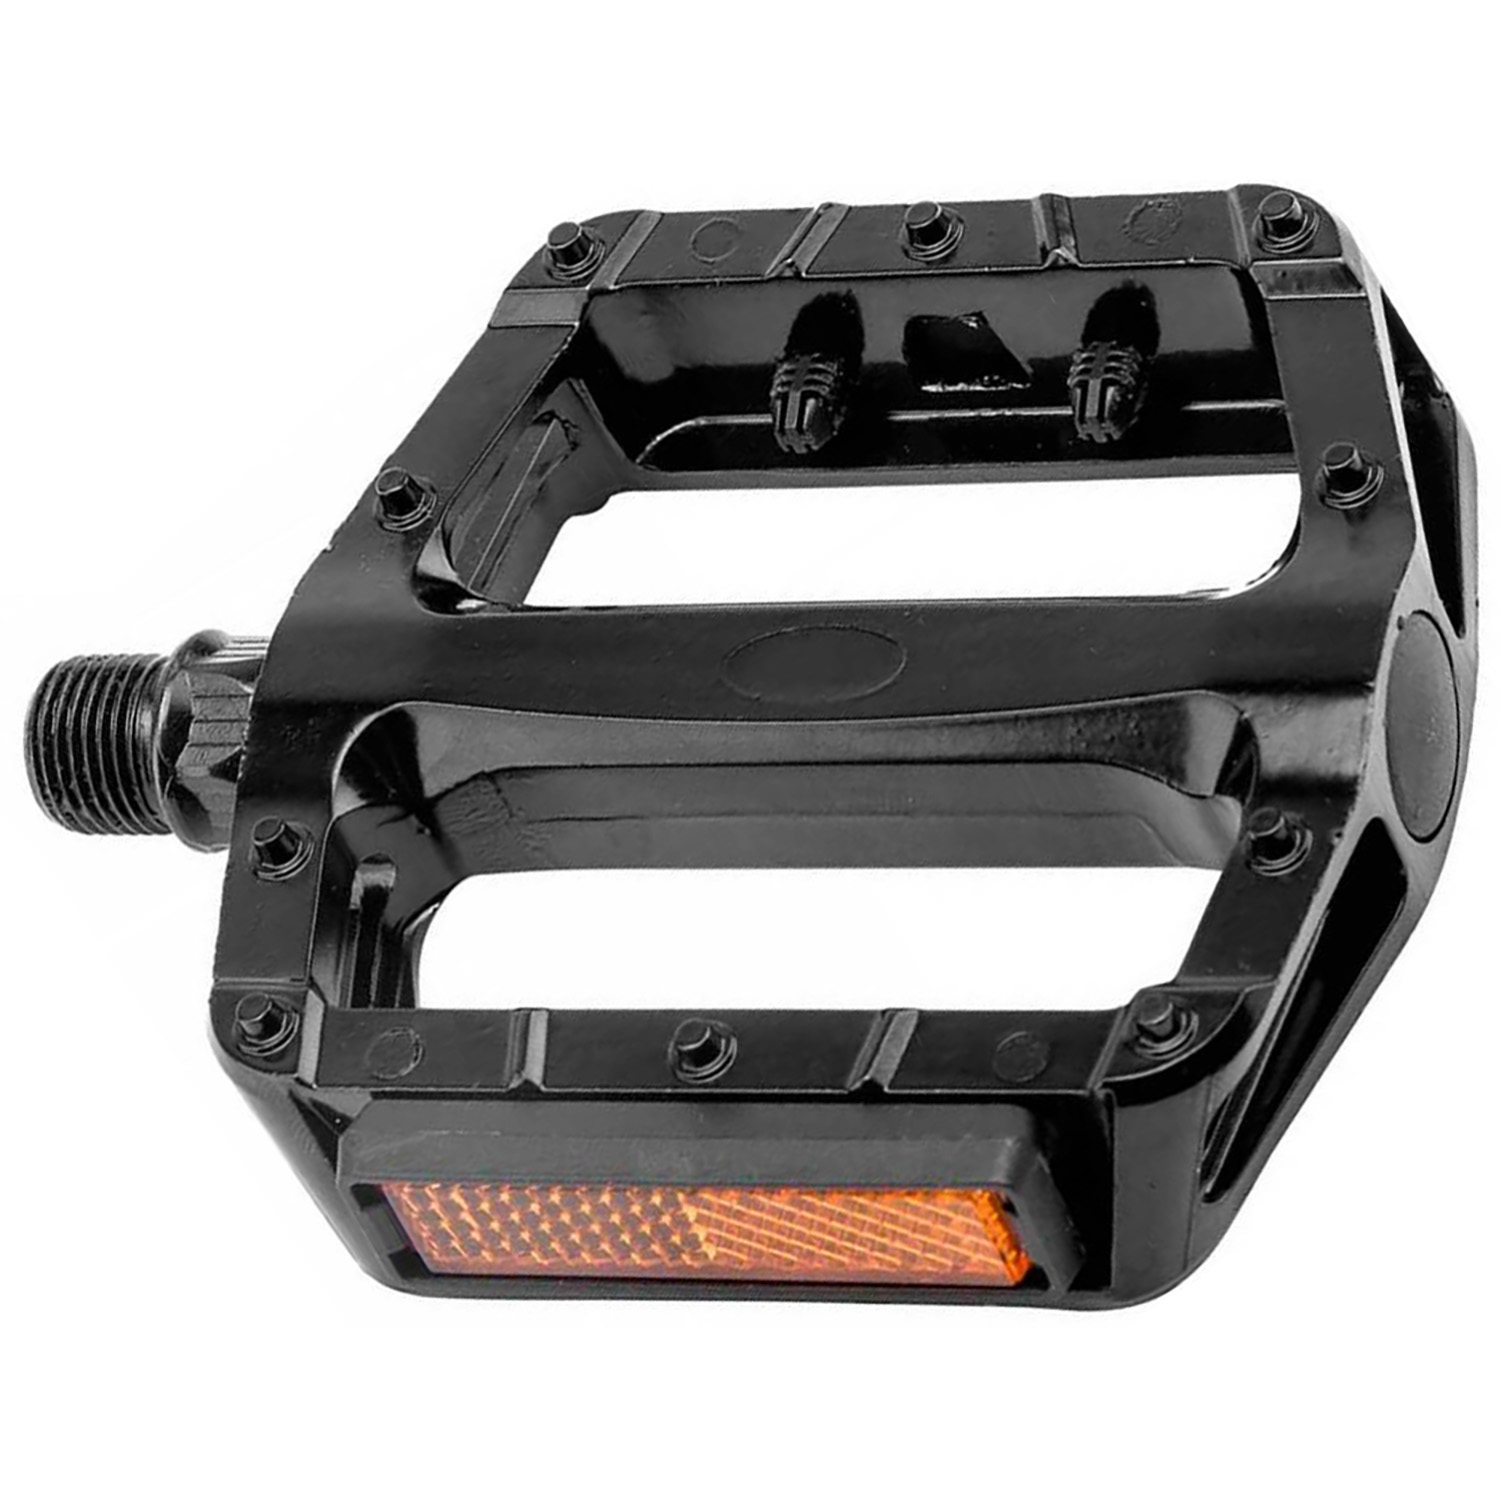 Steady A10 flat pedal – AVAILABLE IN SELECTED BIKE SHOPS